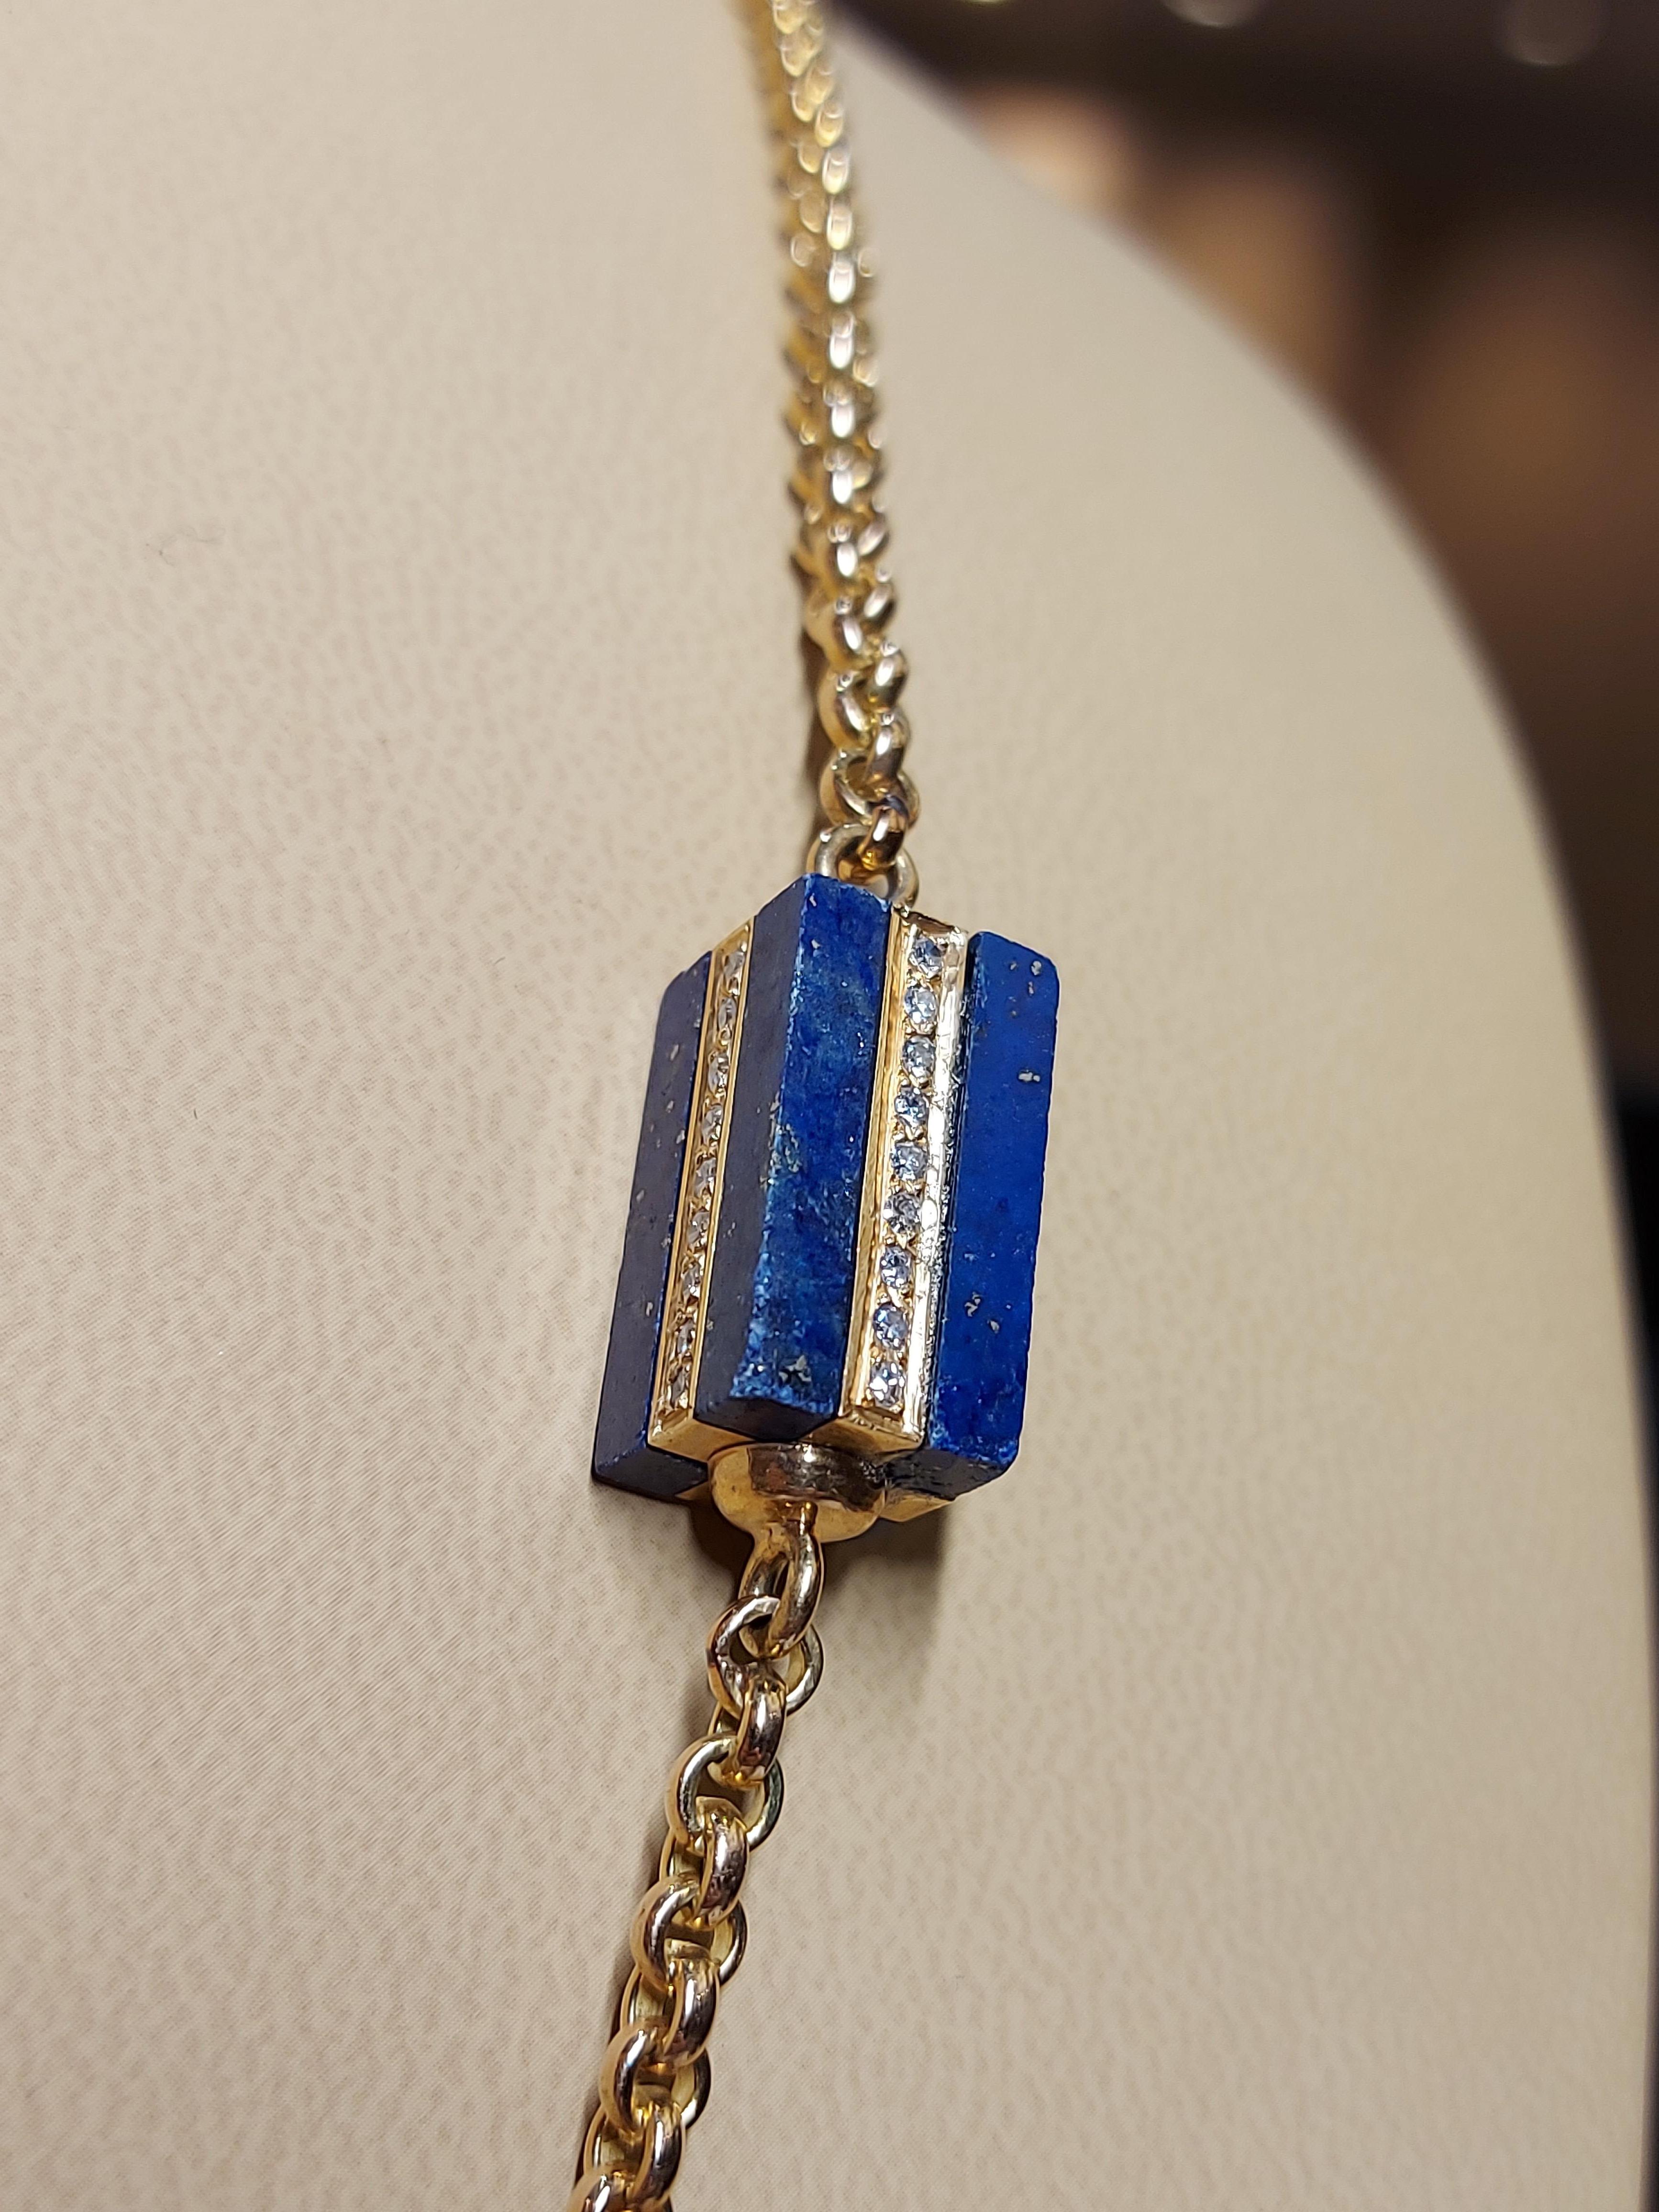 Long Necklace with Lapis Lazuli and 4.32 Ct Diamonds, Estate Sultan Oman Qaboos For Sale 4